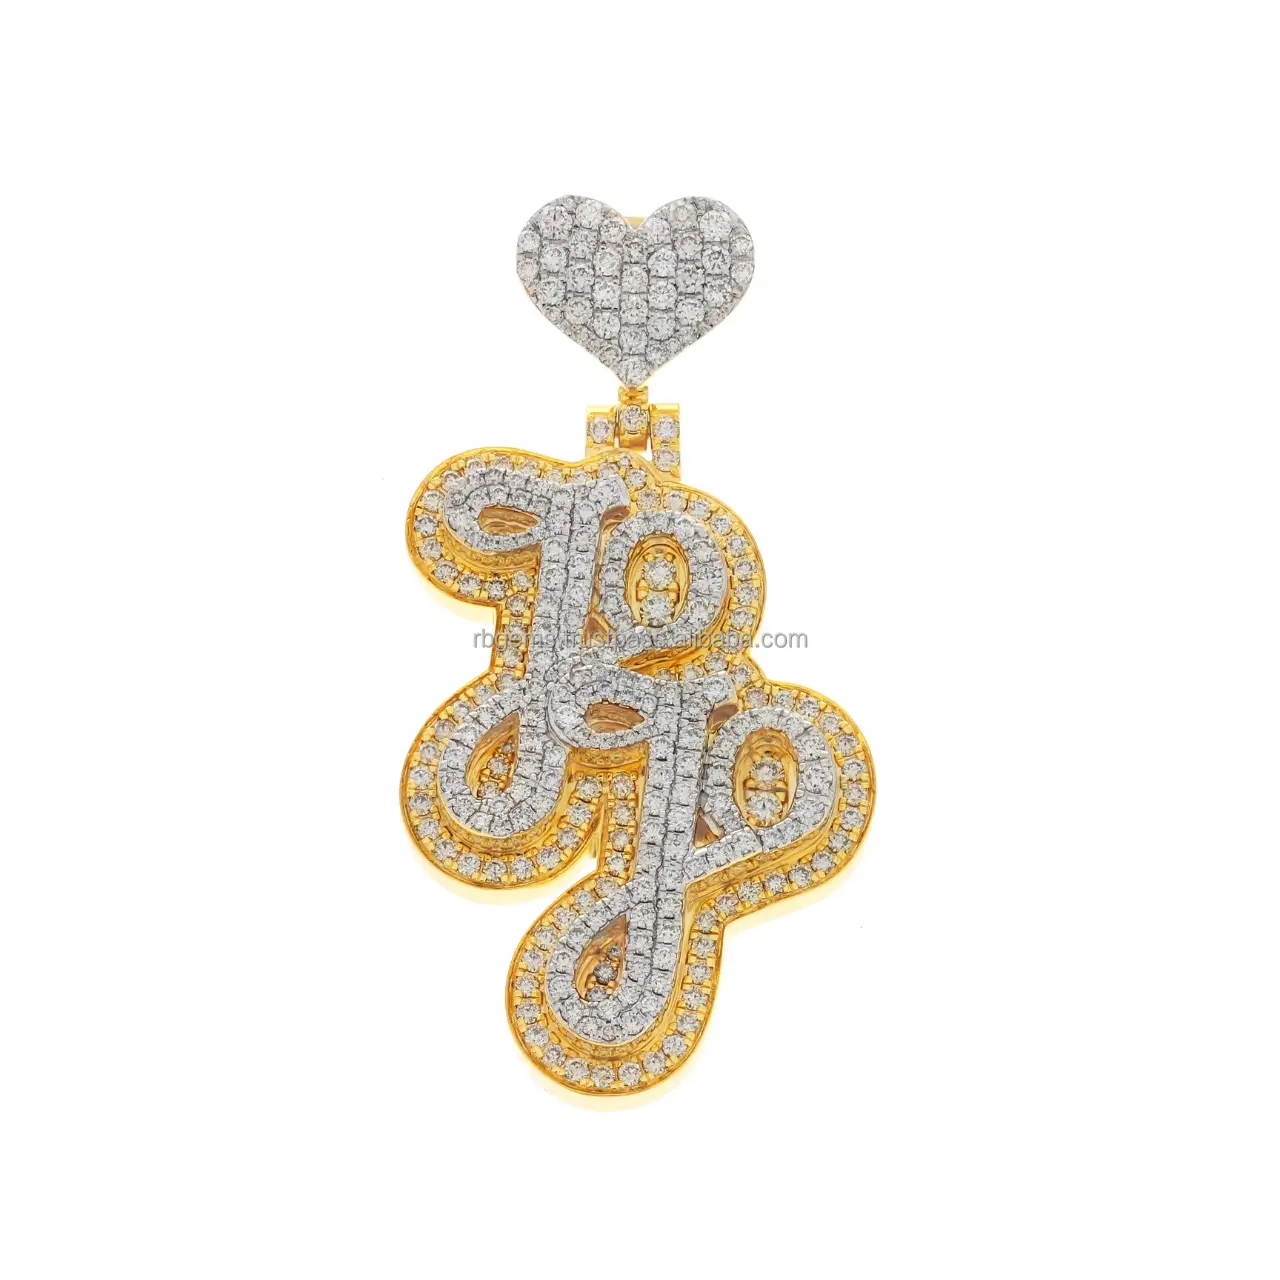 14K yellow gold hip-hop pendant, 44.5g, featuring 6.00ct natural diamonds, customized for both genders, radiating trendy style